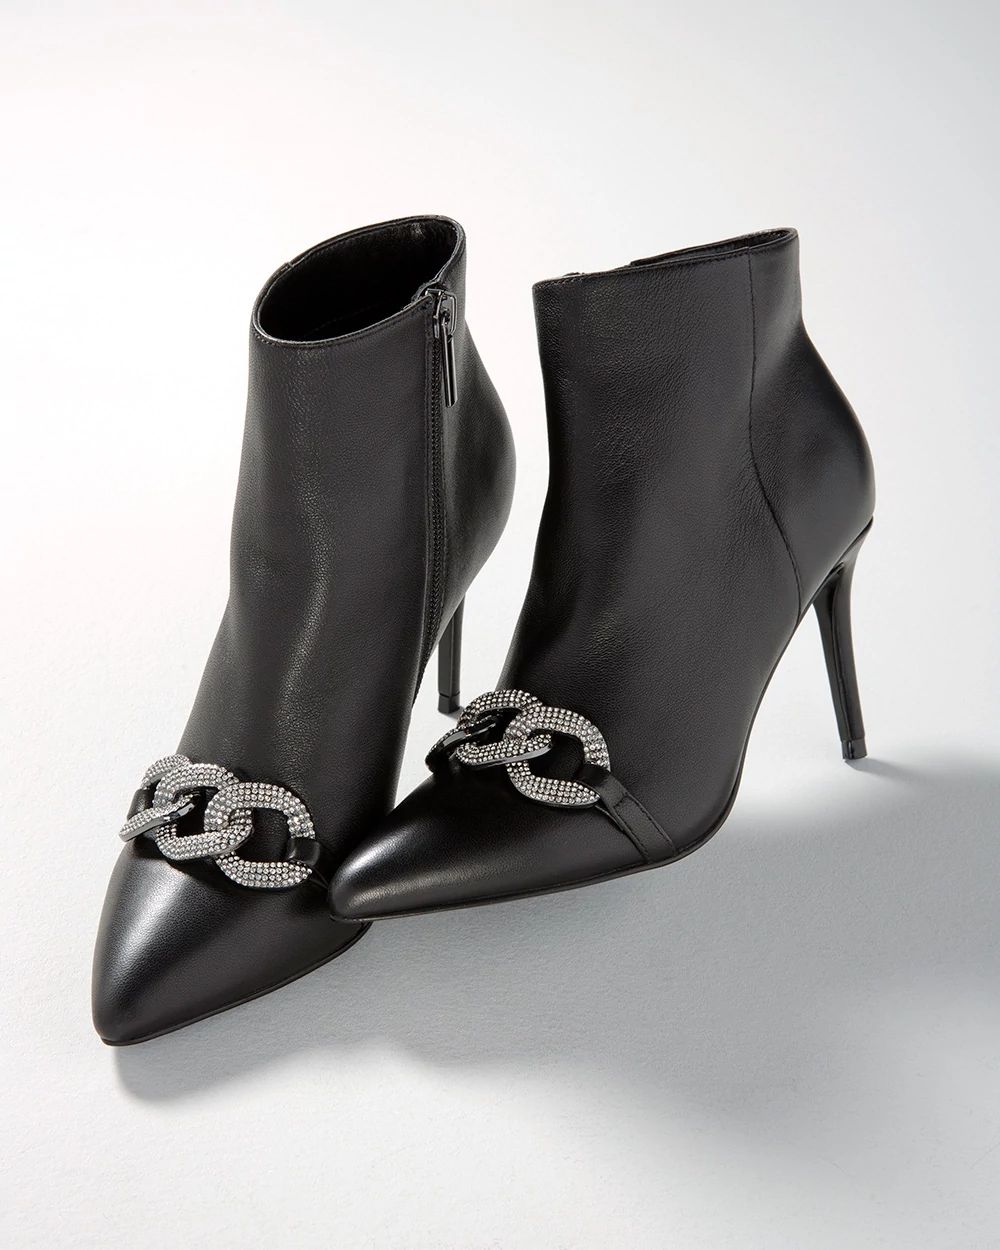 Hematite Chain Mid-Heel Bootie click to view larger image.